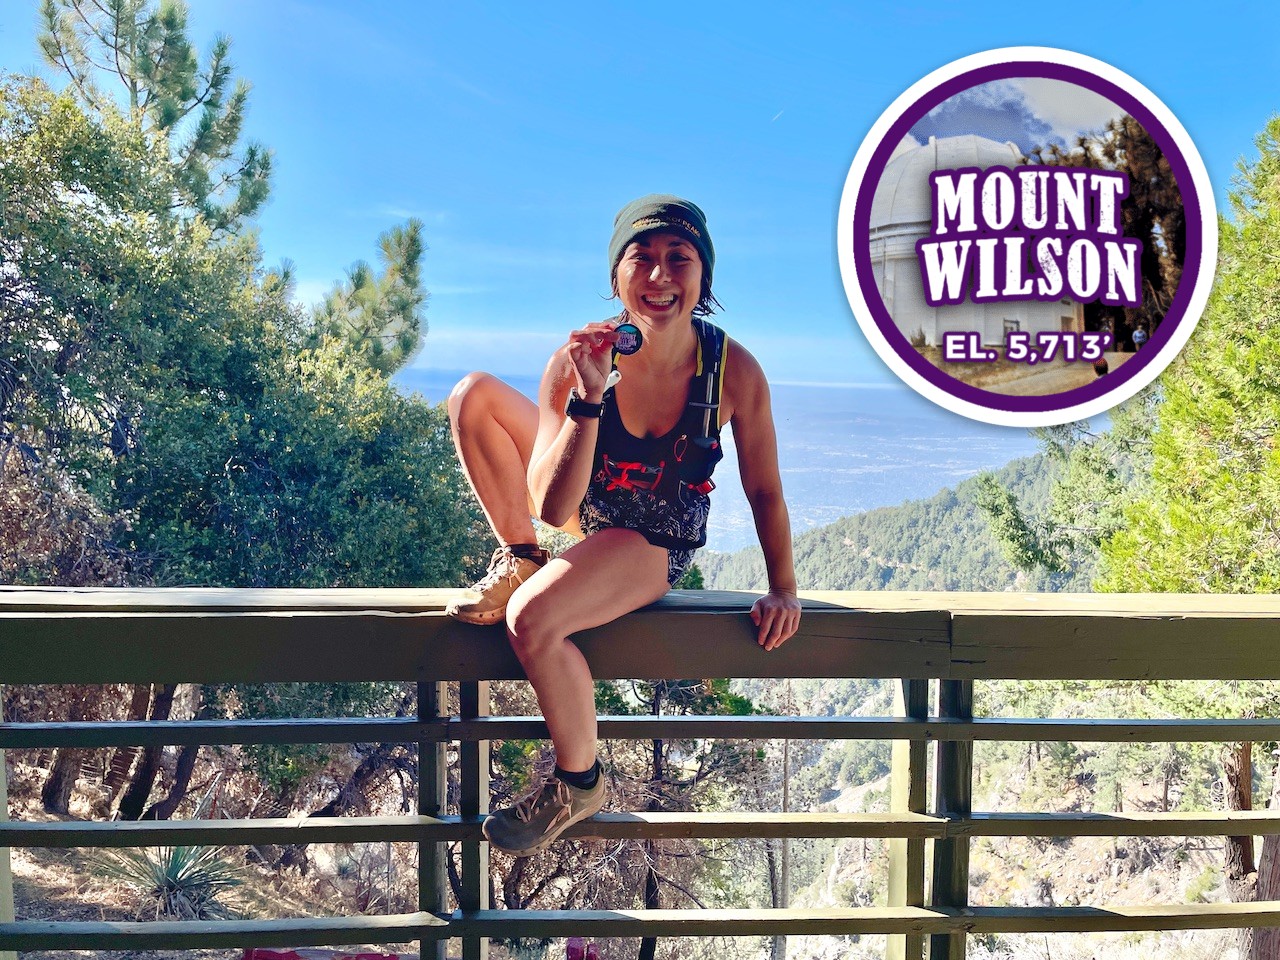 six pack of peaks challenge, trail running, southern california trails, hiking, mount wilson